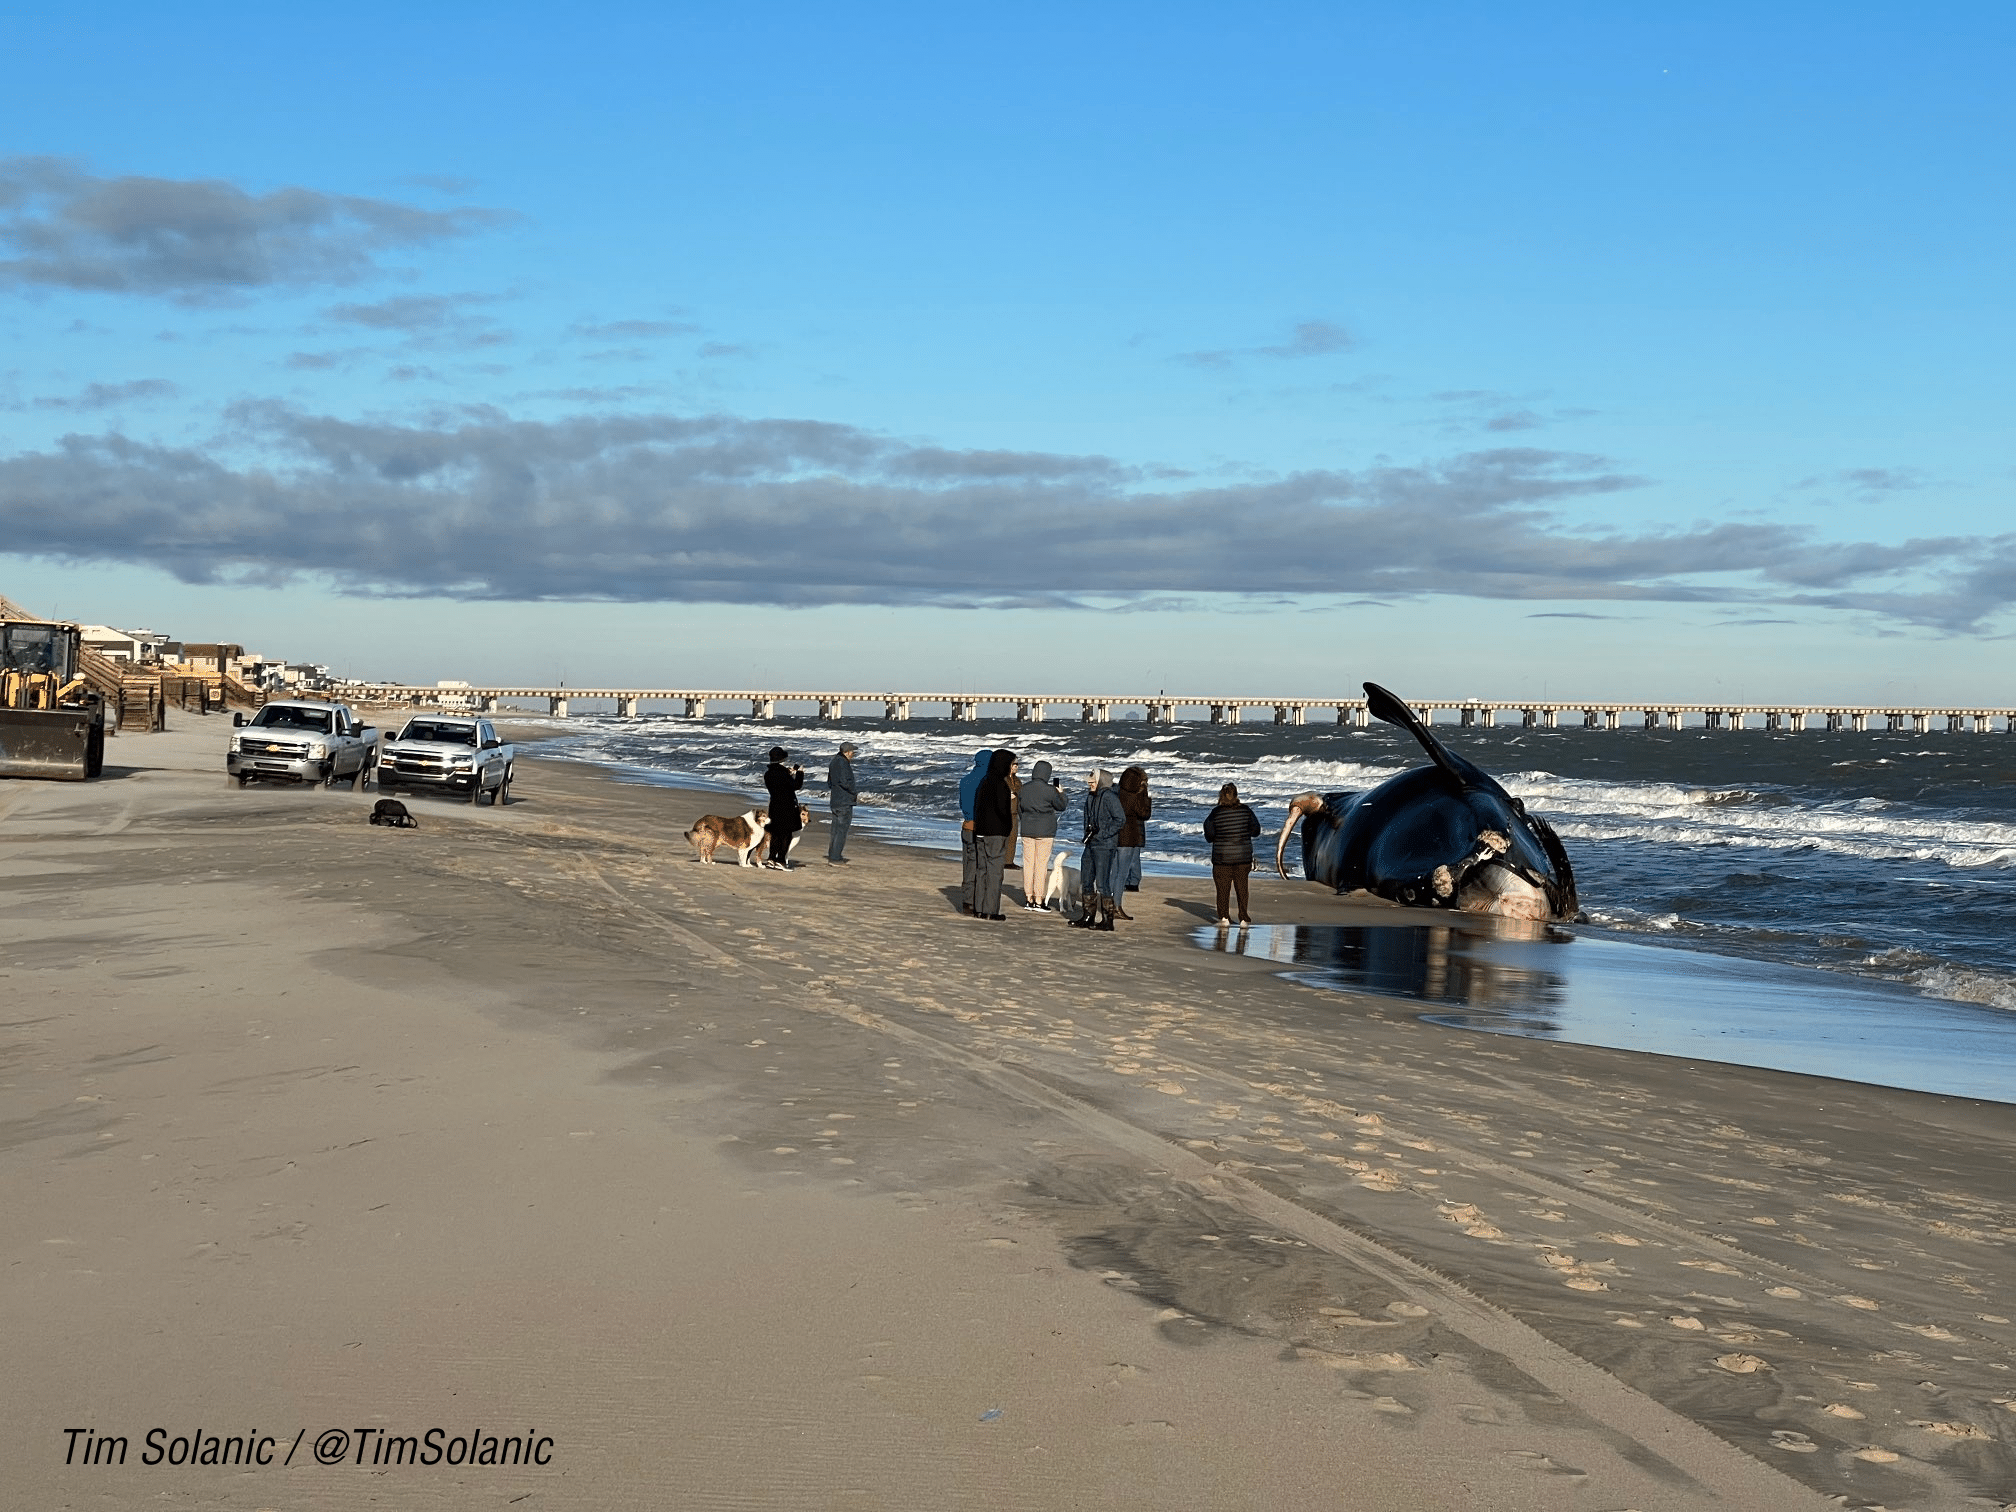 A dead North Atlantic right whale lies on a beach with some people and cars around it. A bridge can be seen in the background.